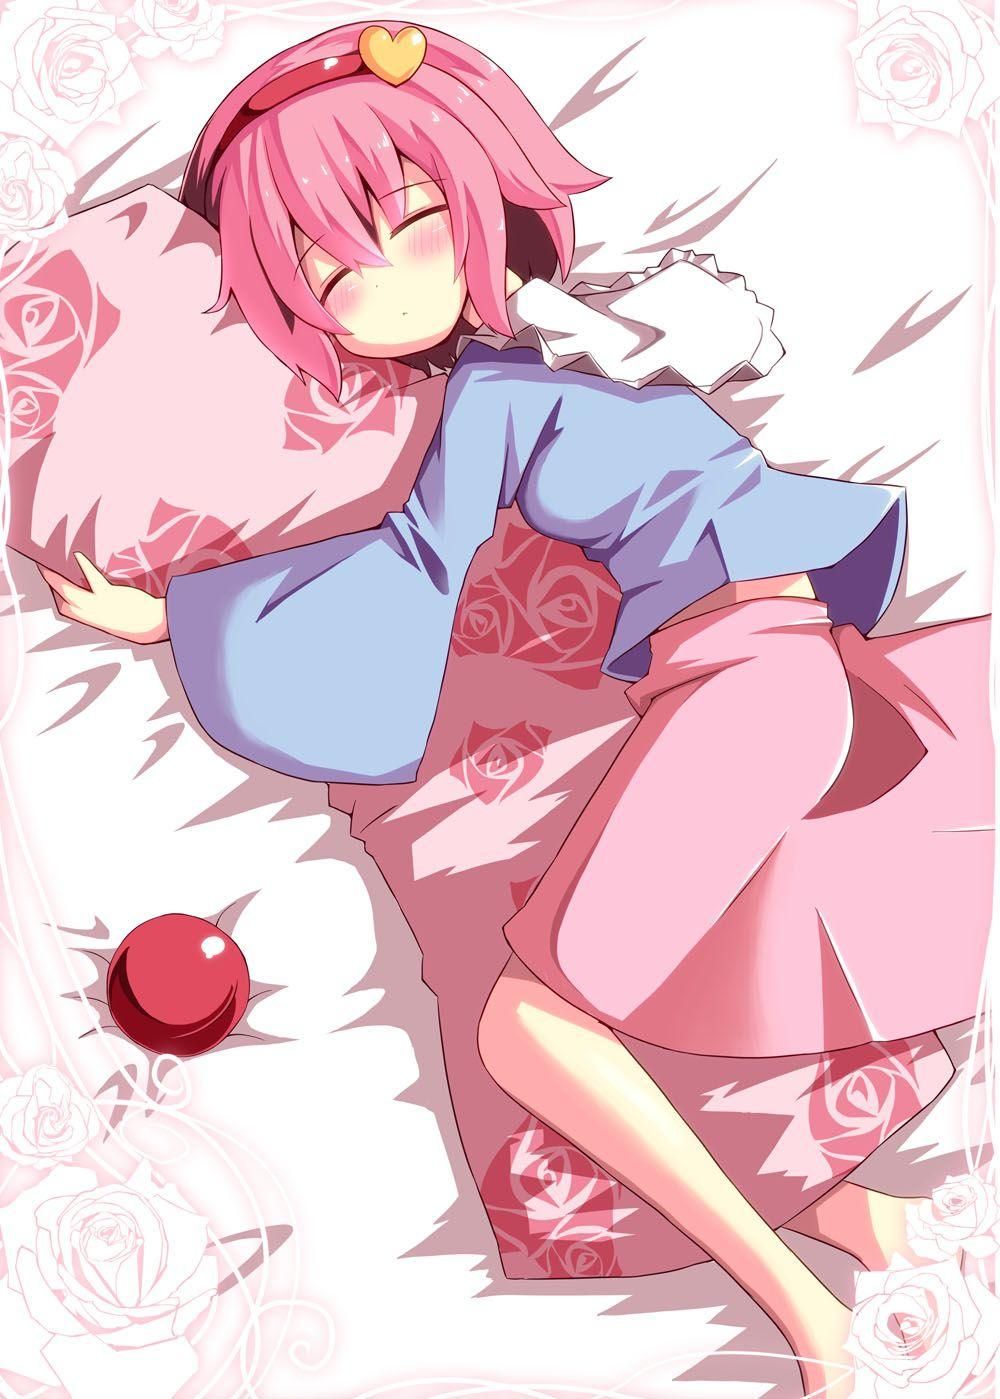 [Secondary] image be healed in the girl's cute sleeping face 36